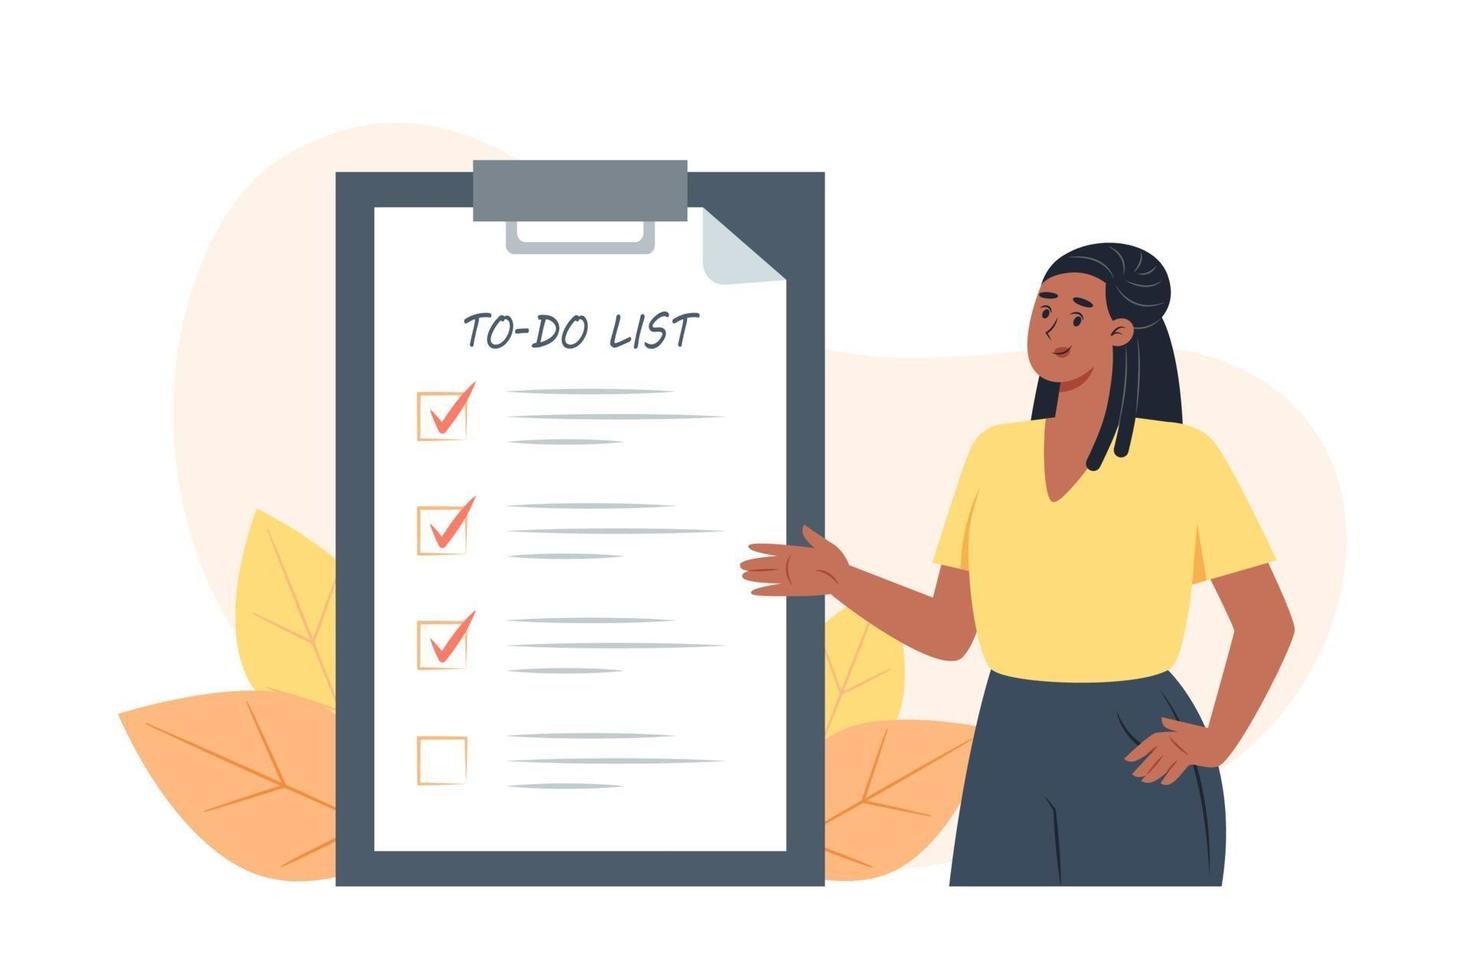 To-do list, young woman puts check marks in front of completed tasks vector